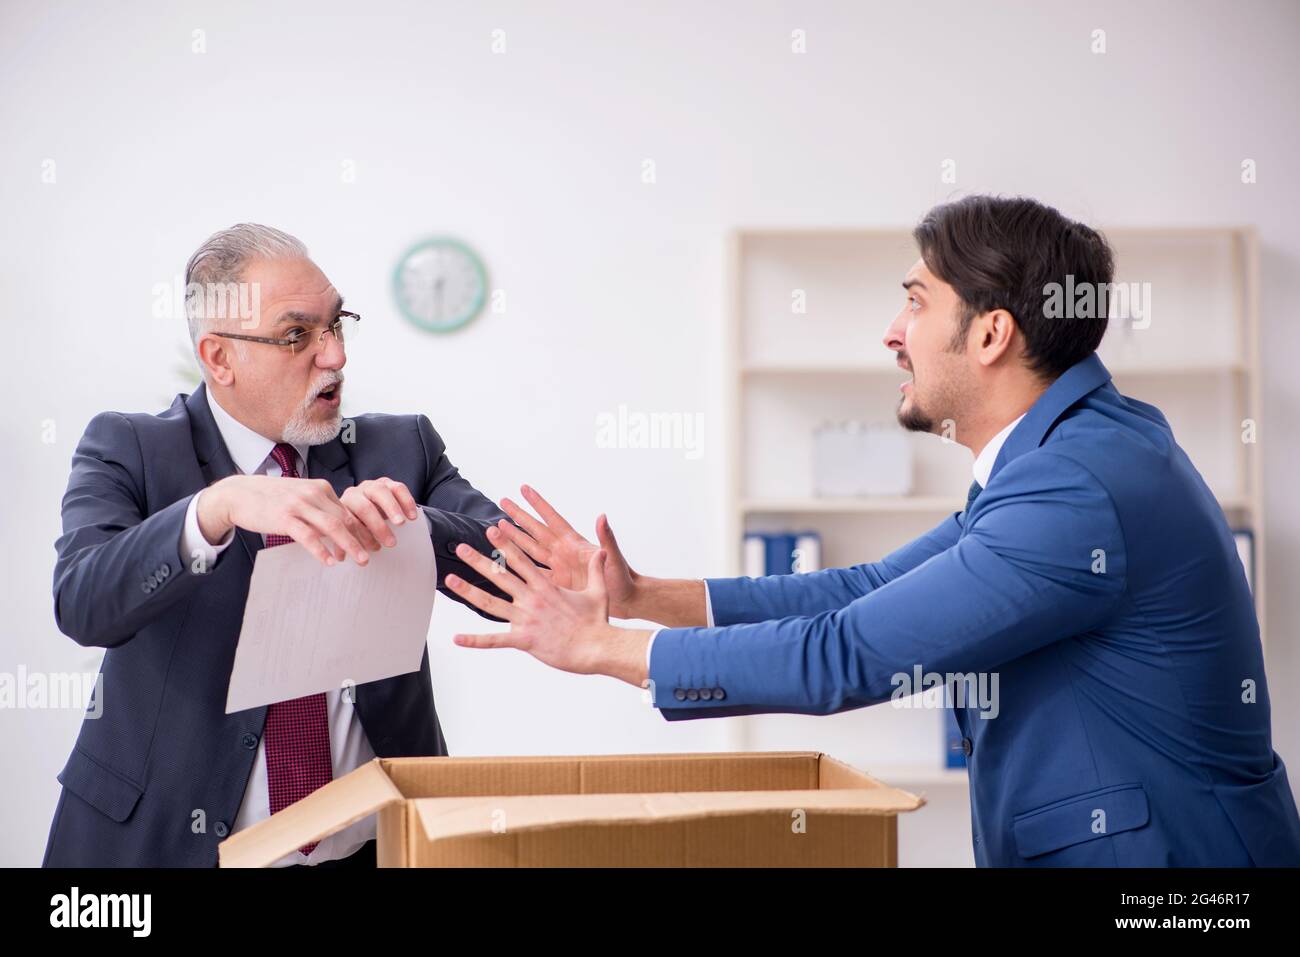 Two employees in dismissal concept Stock Photo